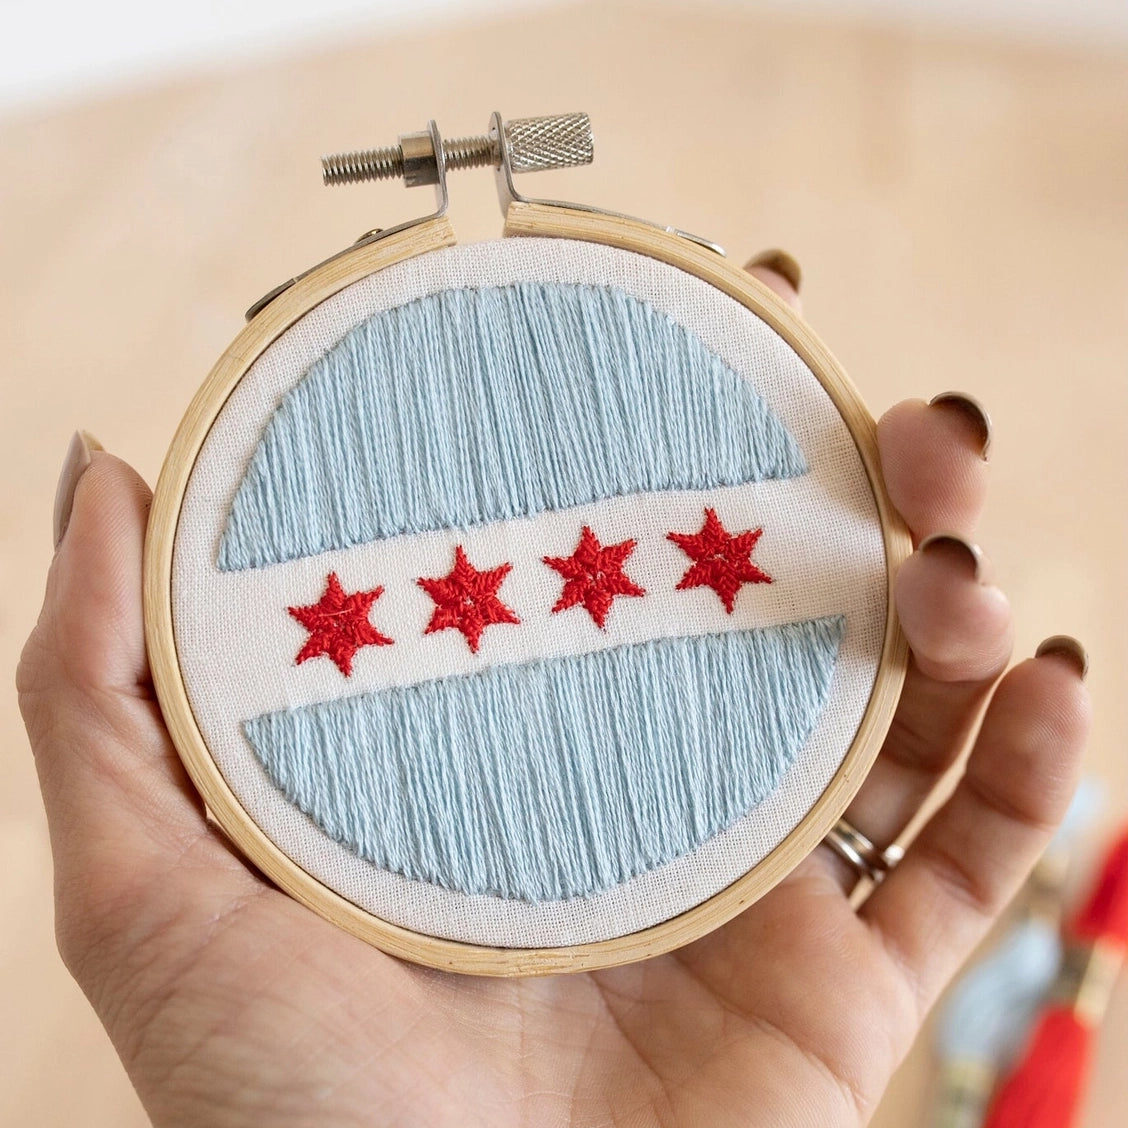 Chicago Flag Ornament or Mini Wall Hanging Embroidery Kit